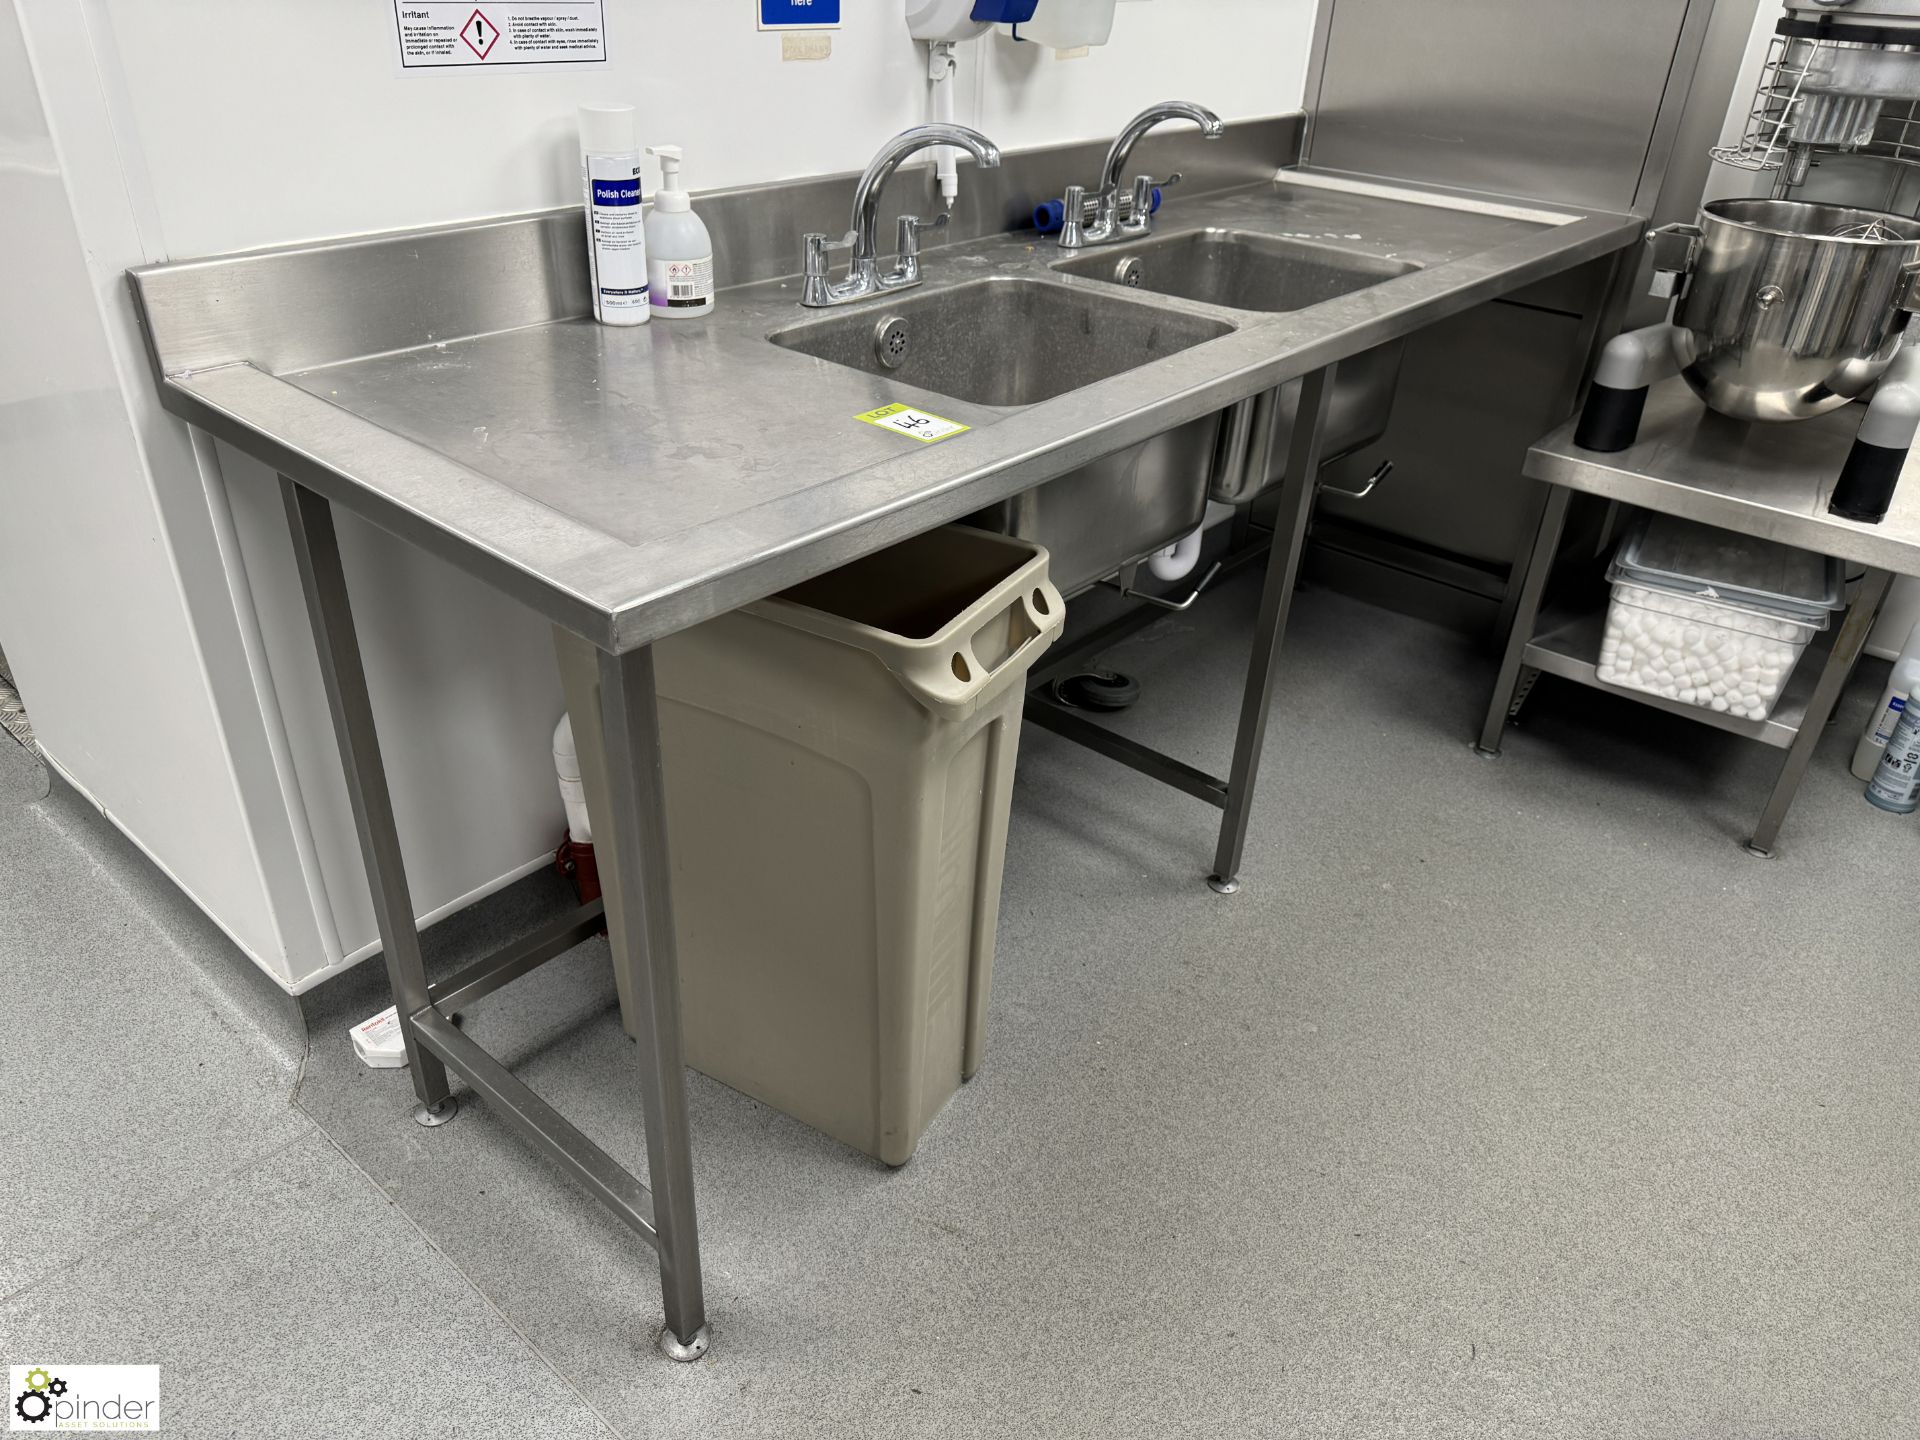 Stainless steel twin bowl Sink, 2270mm x 730mm x 900mm (location in building – basement kitchen 2) - Image 3 of 4